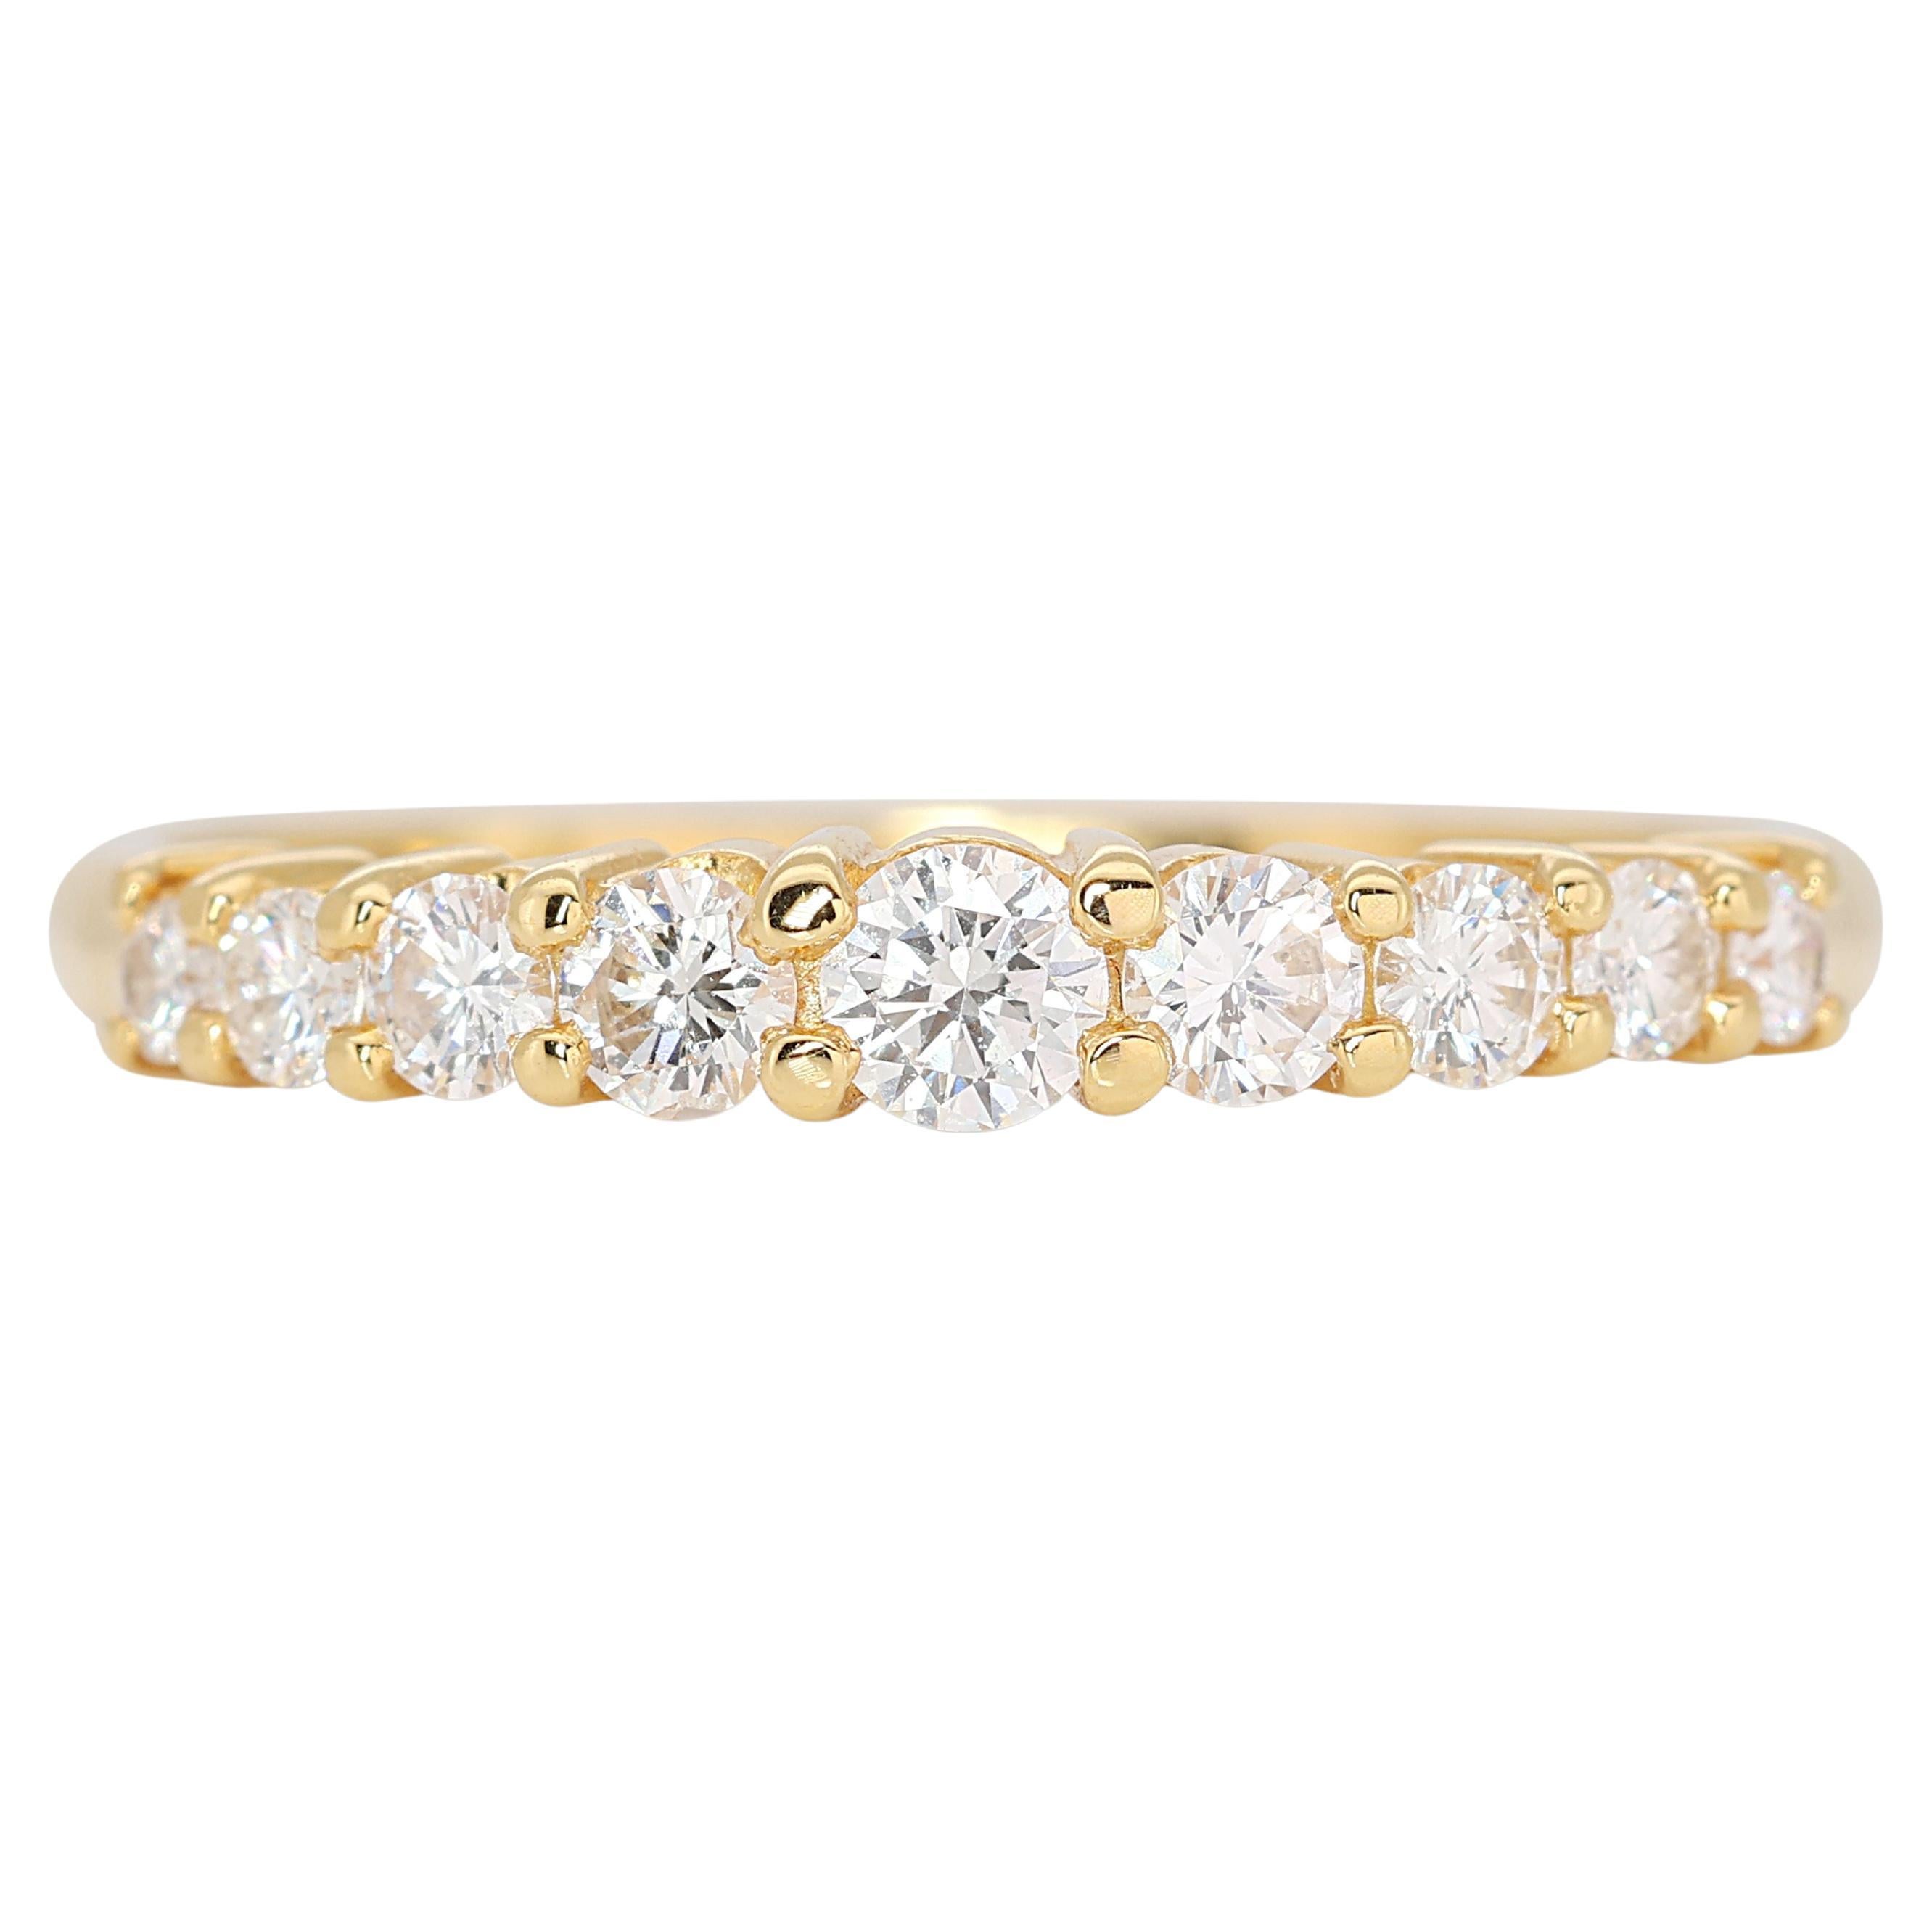 Dazzling 18k Yellow Gold Pave Ring with 0.35ct Natural Diamonds